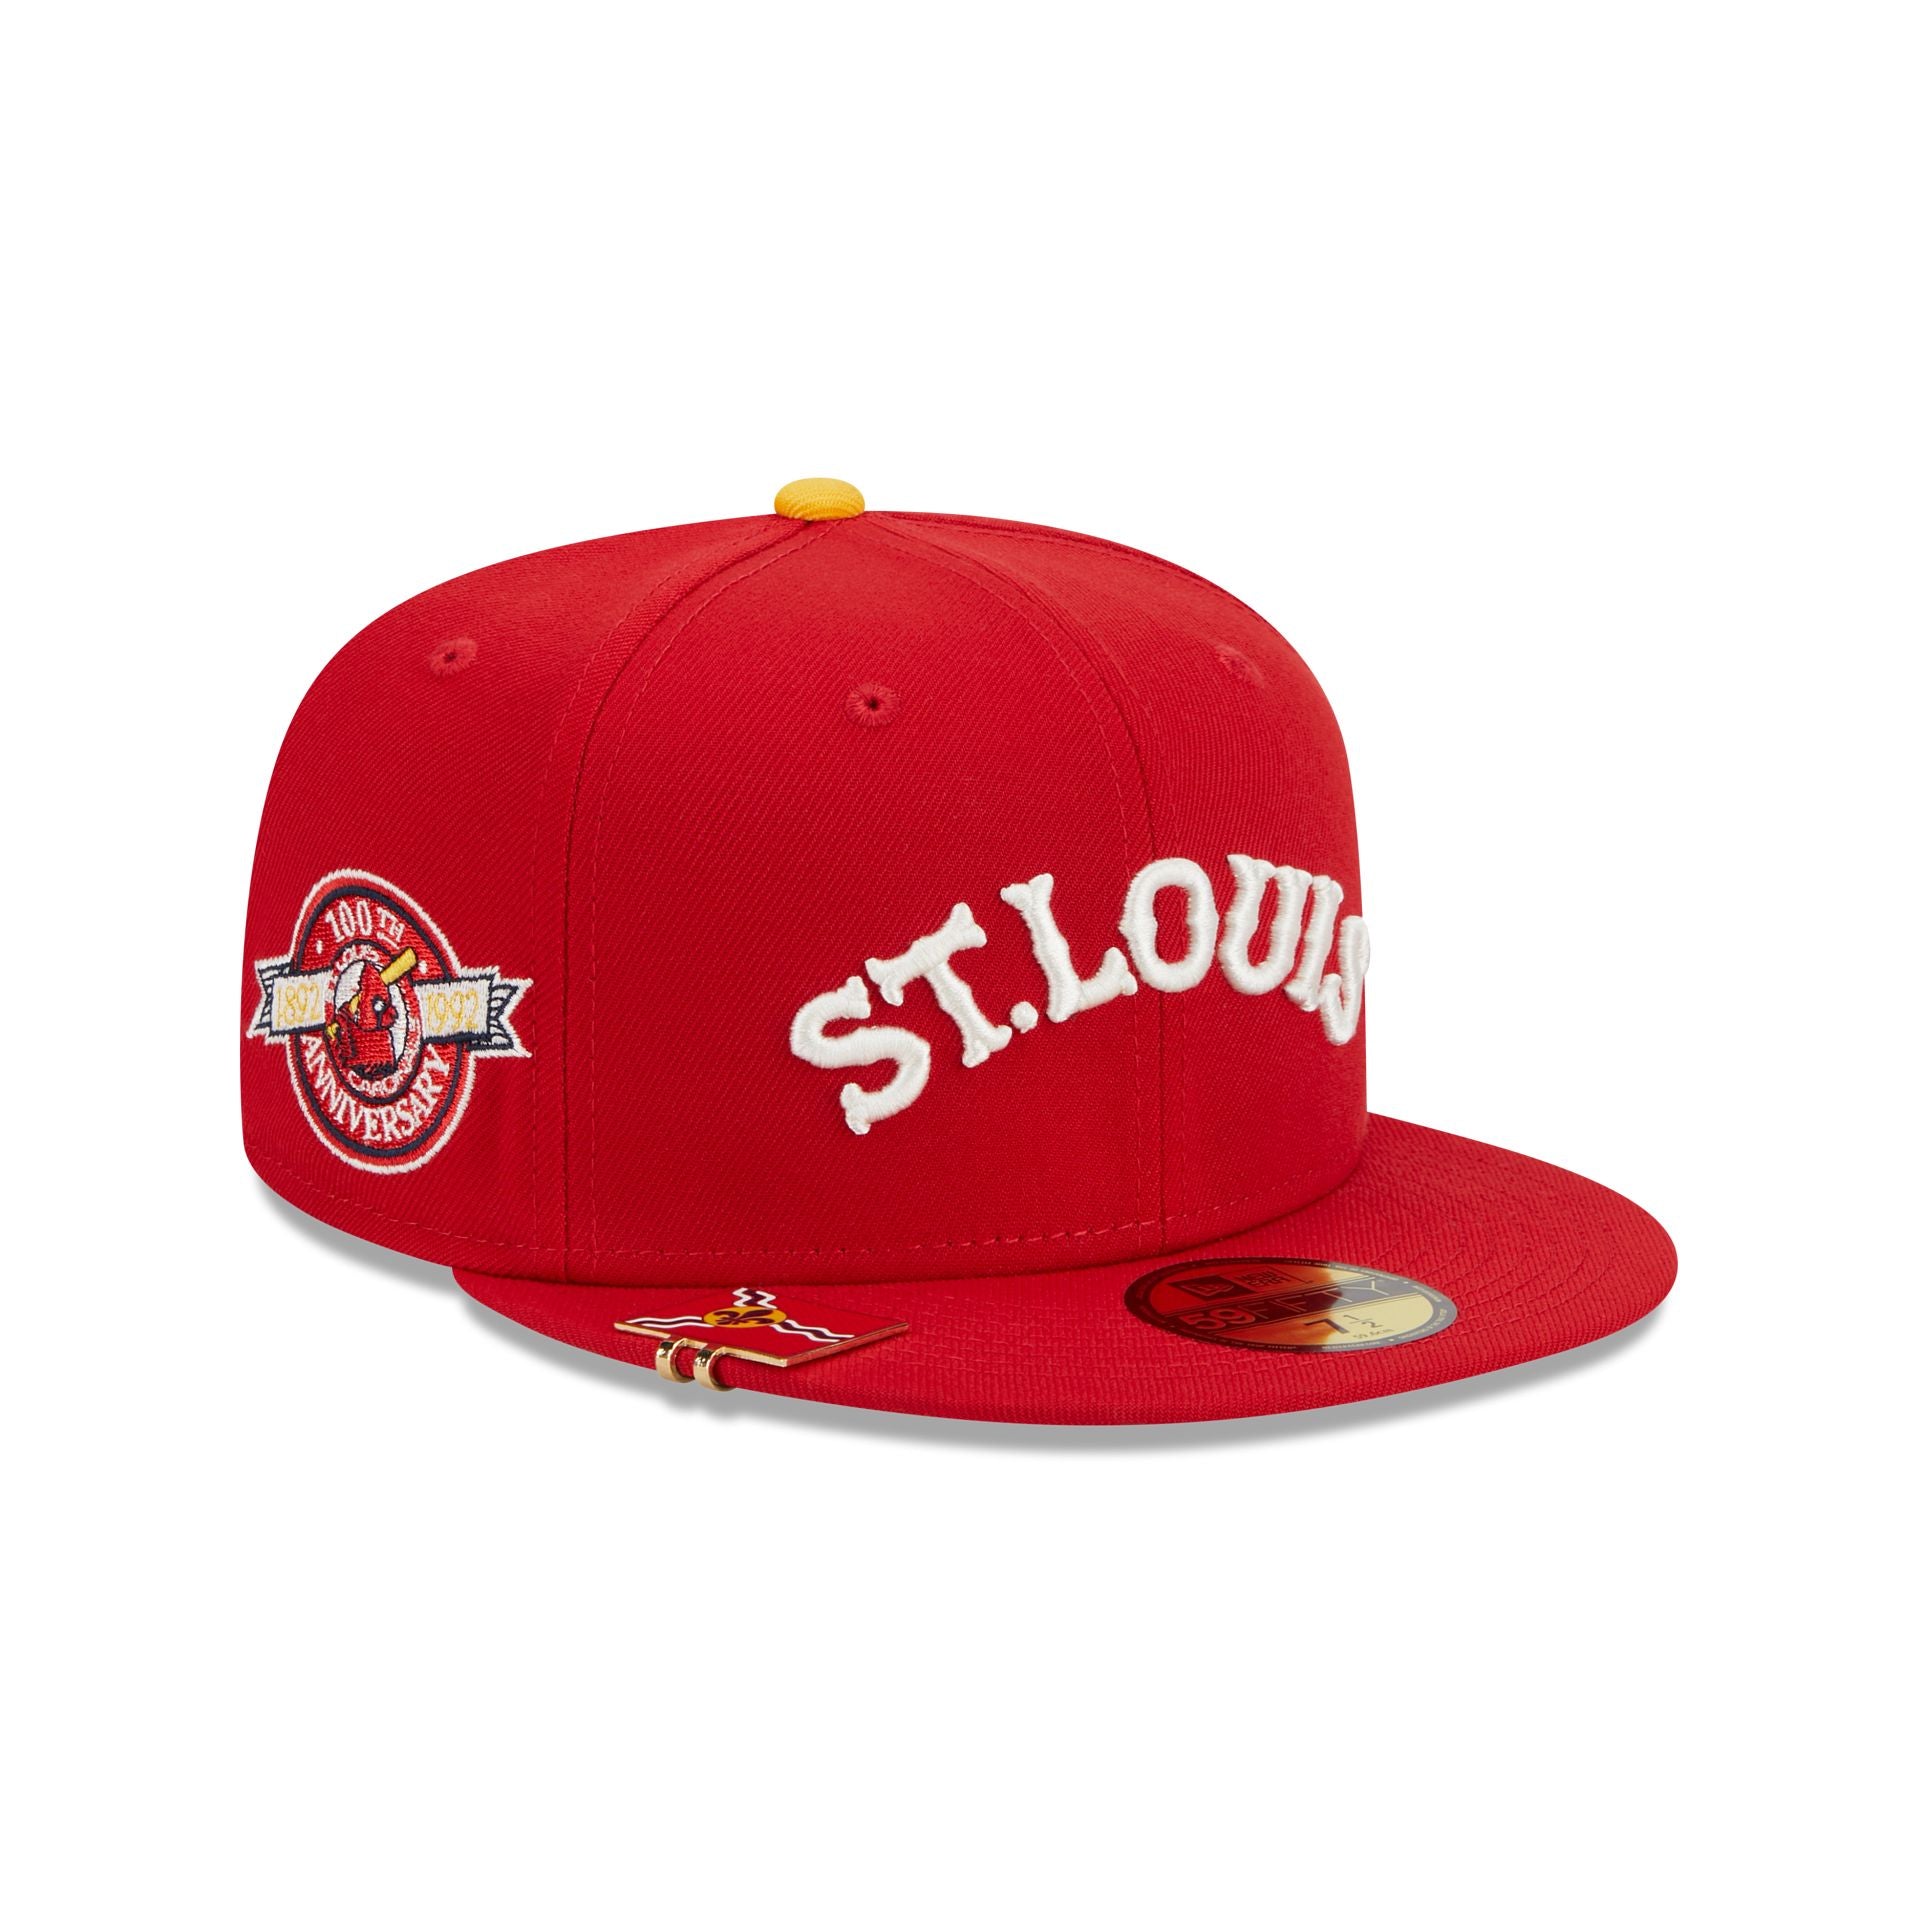 Men's New Era Light Blue/Red St. Louis Cardinals Spring Color Two-Tone 59FIFTY Fitted Hat